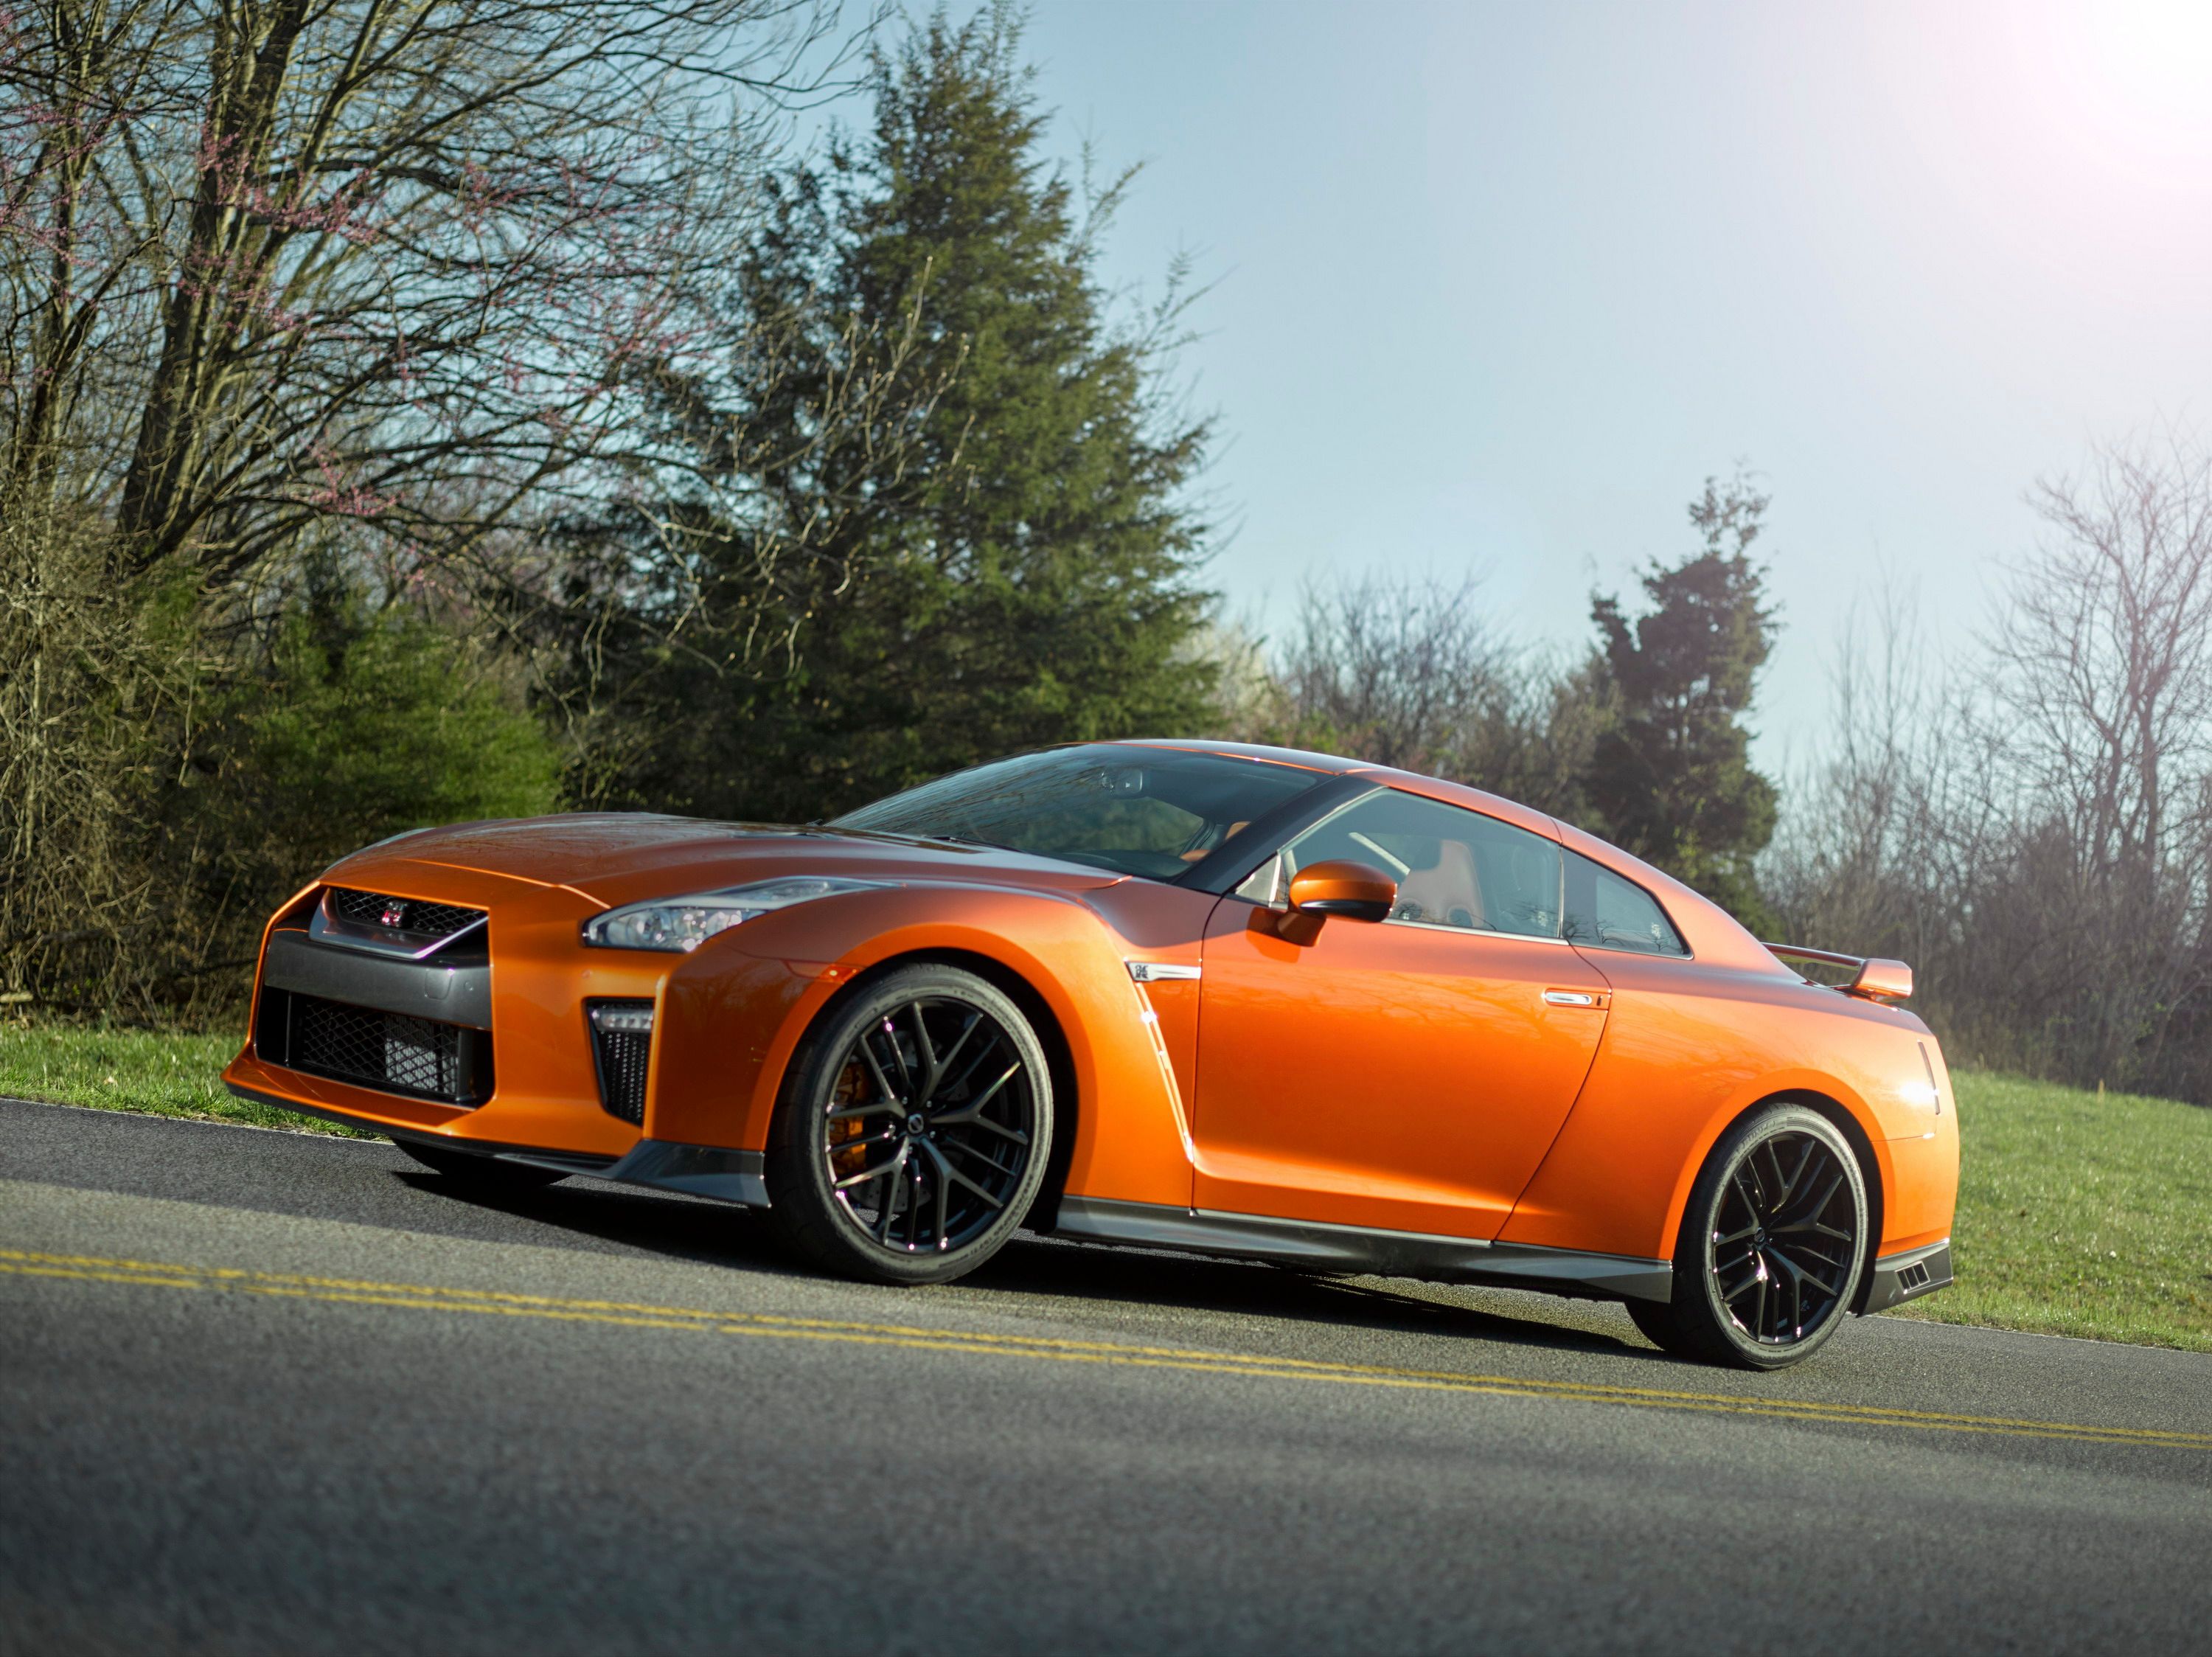 2019 - 2020 Your Pre-Teen May Be Driving Before the Next-Gen R36 Nissan GT-R Comes to Market